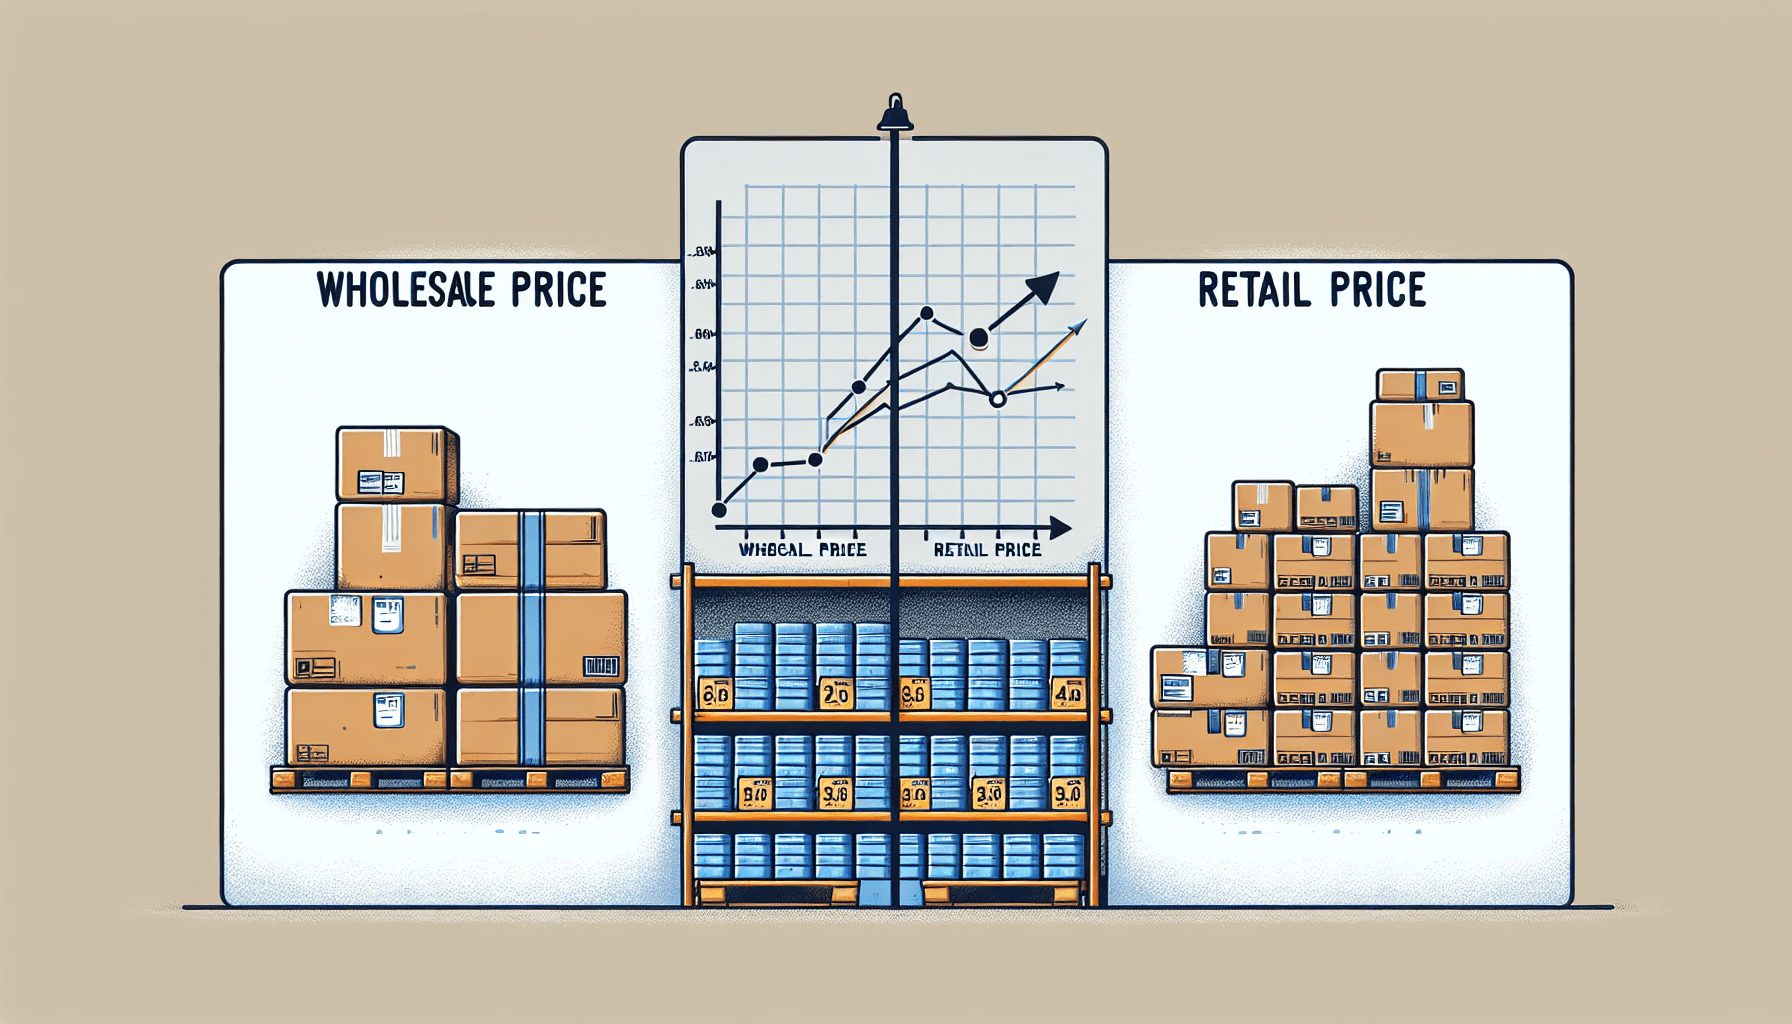 Average retail and wholesale prices and correlations